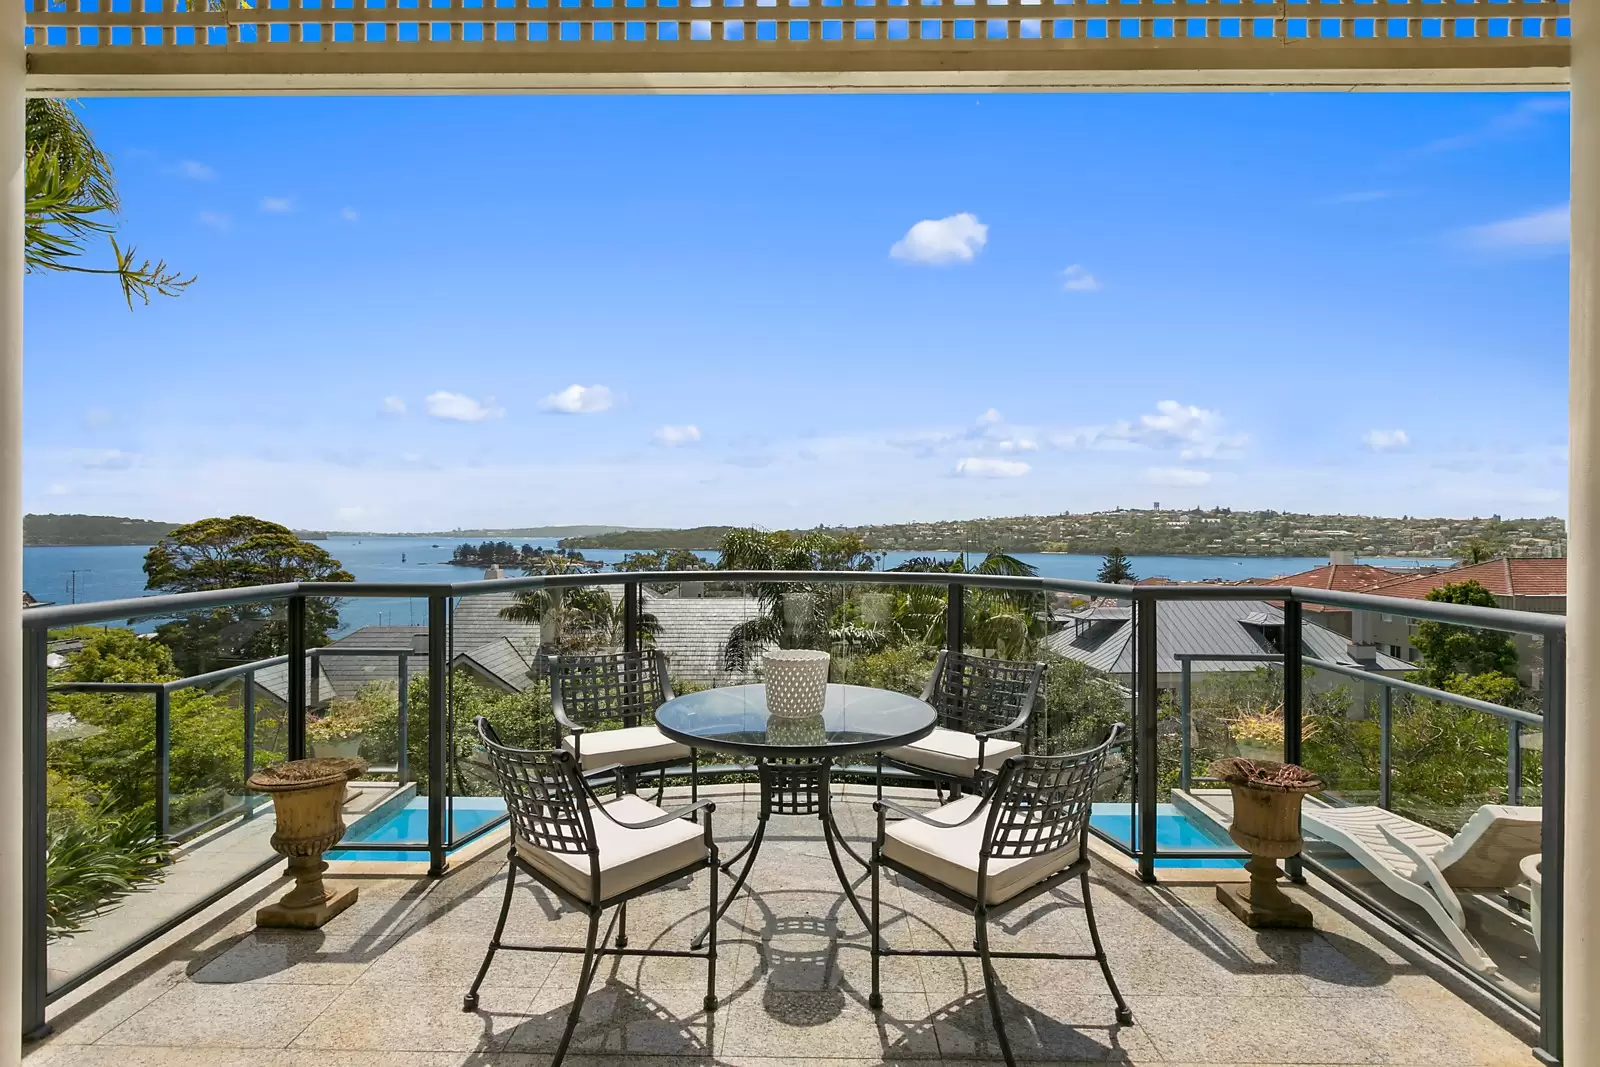 Photo #10: 14 Wentworth Place, Point Piper - Sold by Sydney Sotheby's International Realty